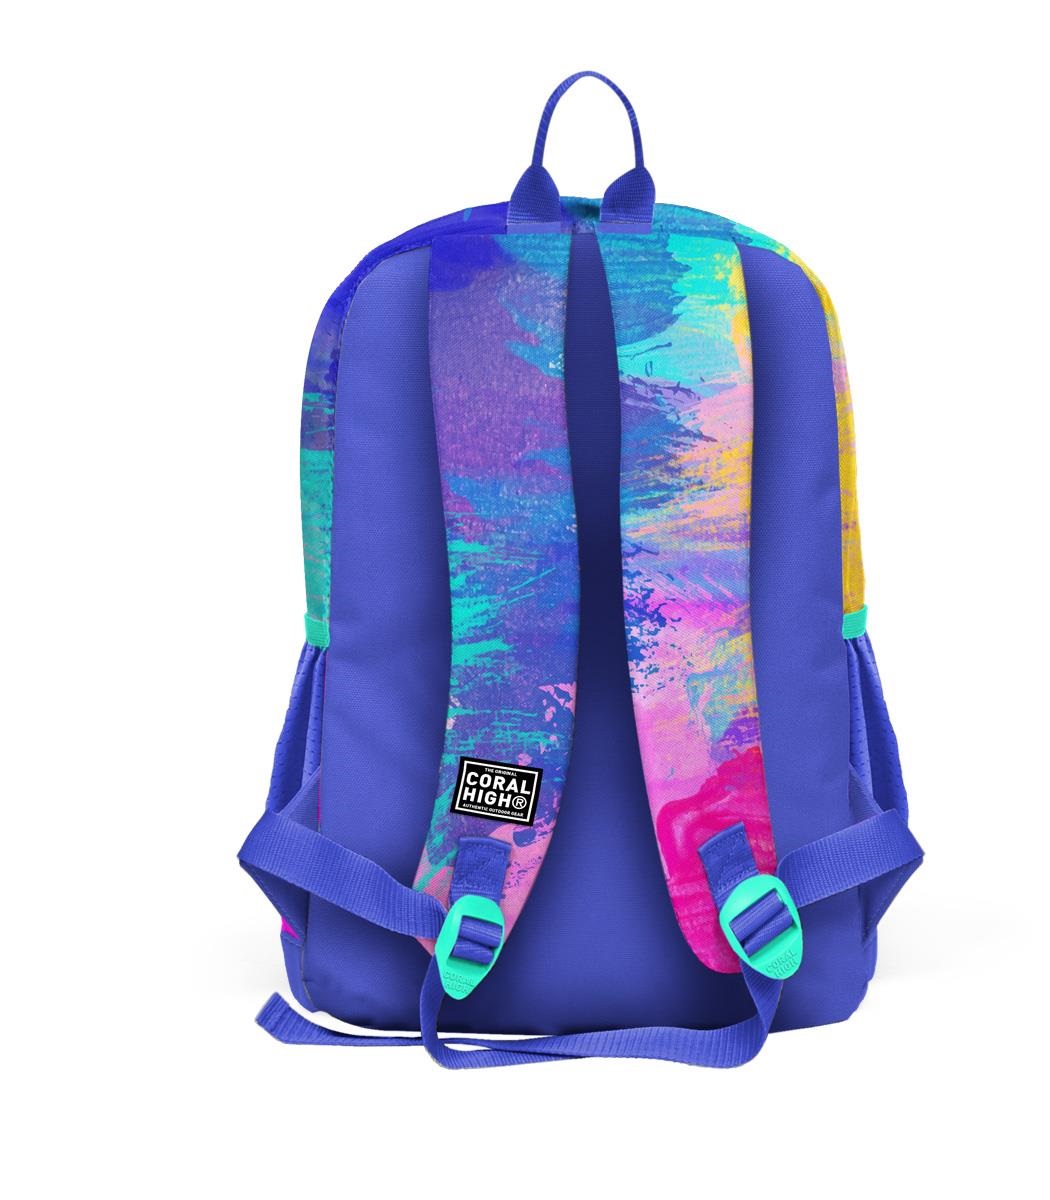 Coral High Kids Four Compartment School Backpack - Colorful Airbrush Patterned Patterned